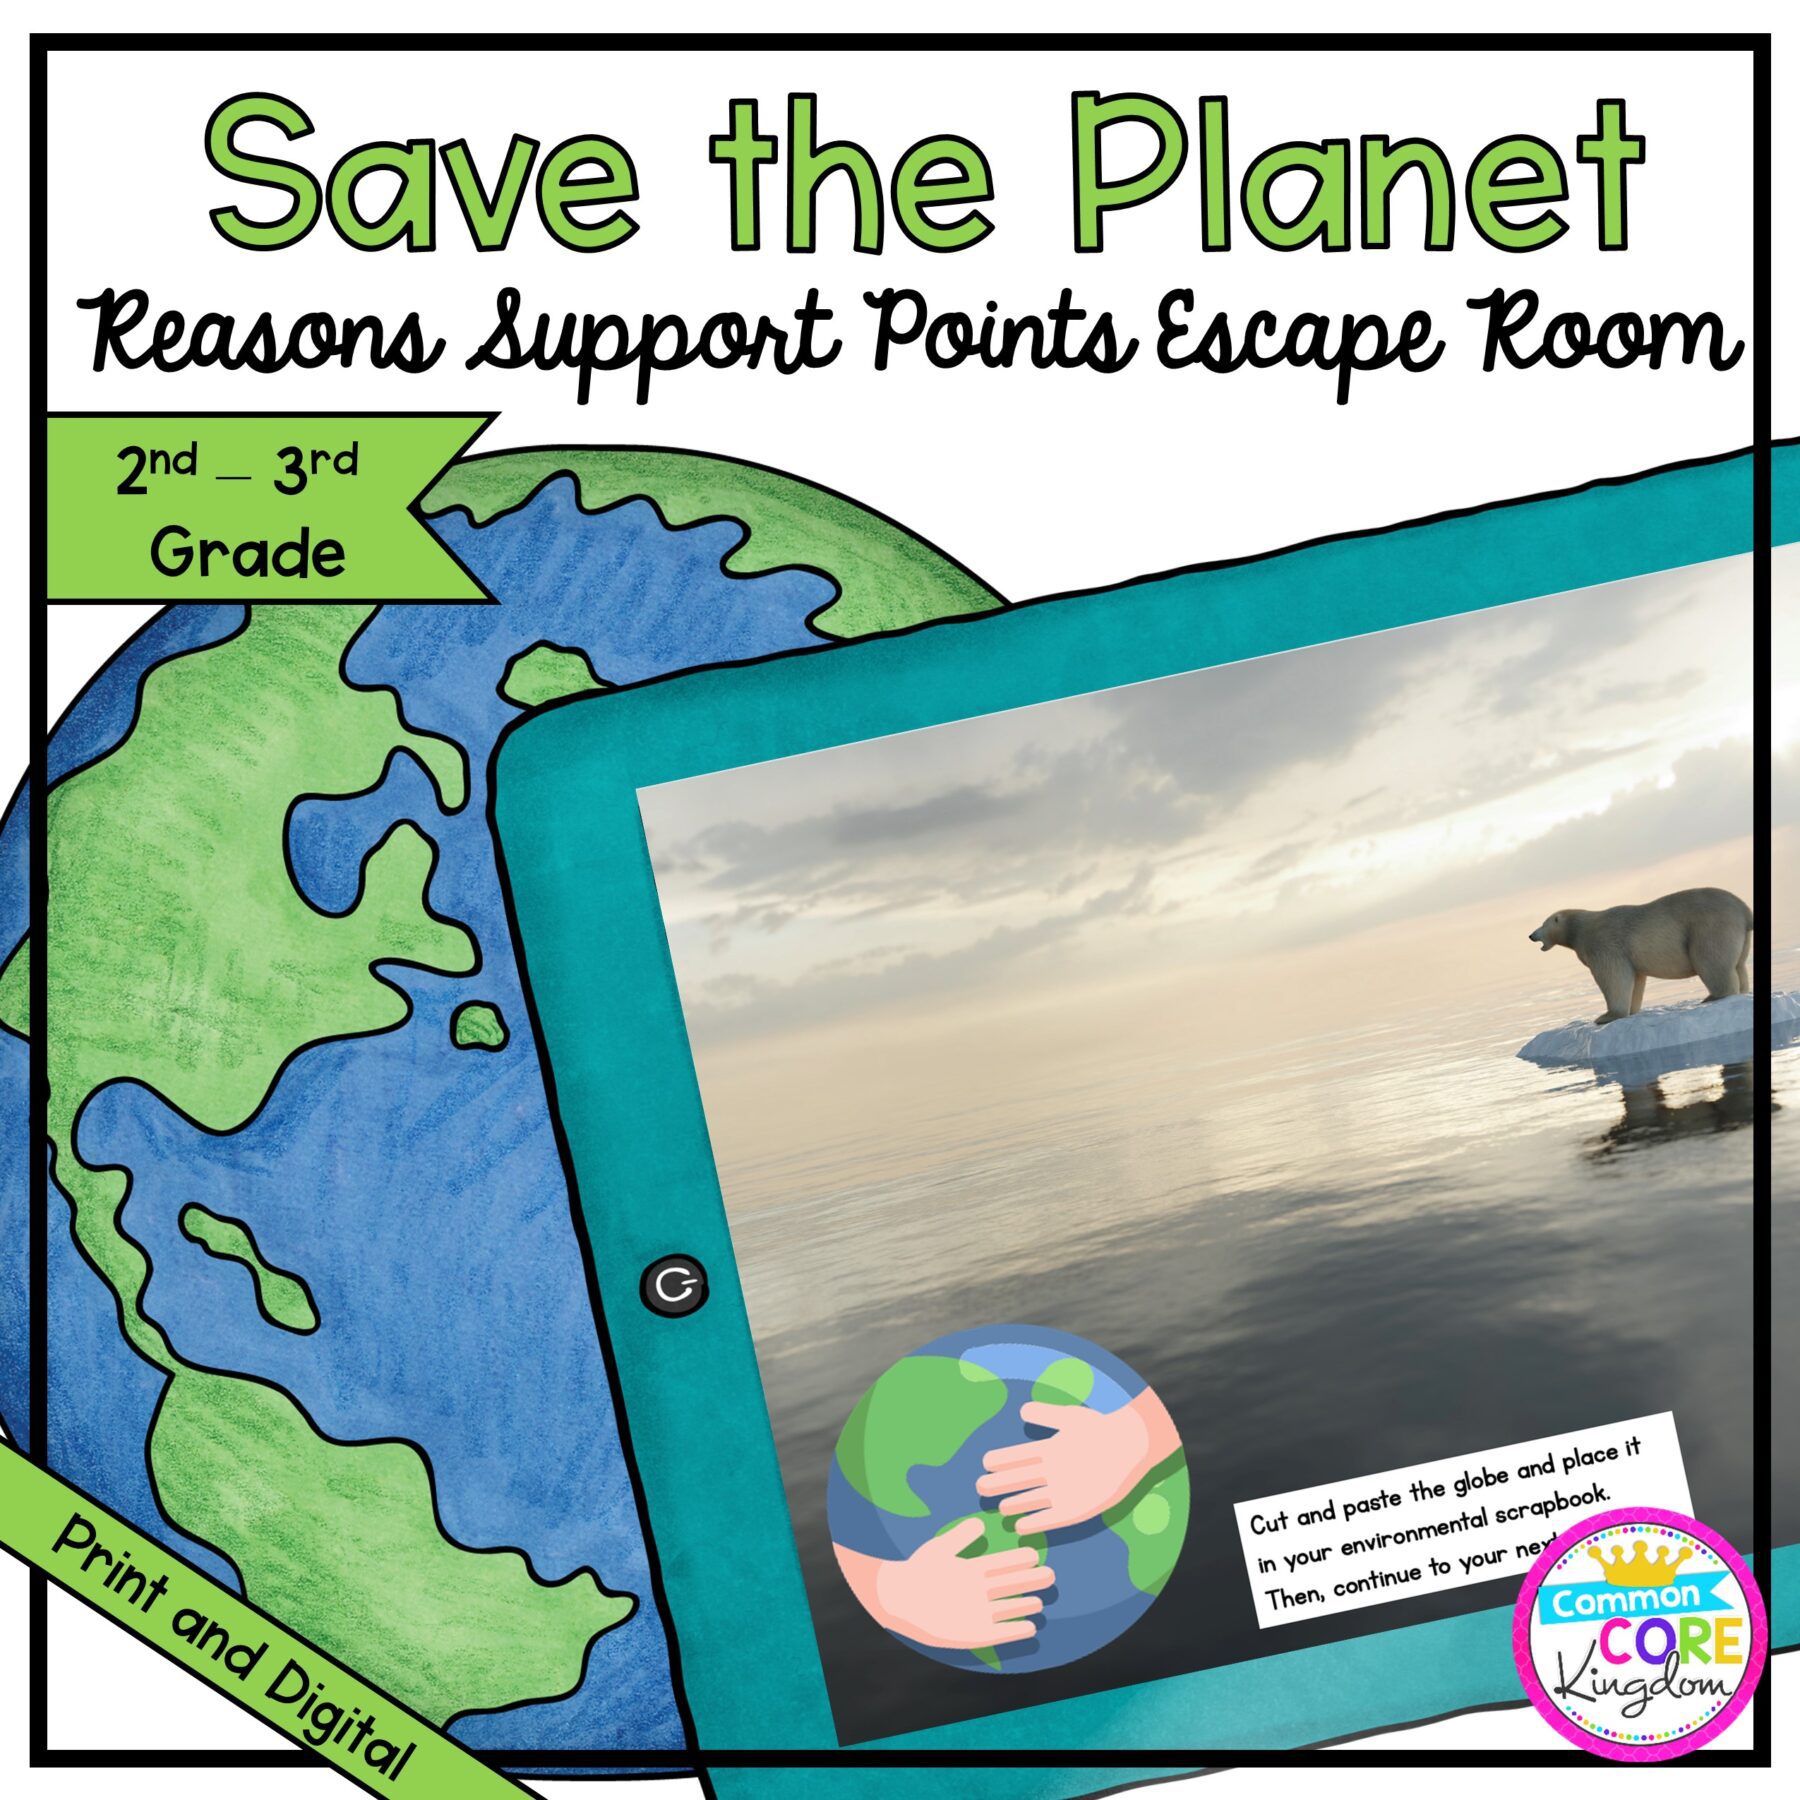 Save the Planet Reasons Support Escape Room for 2nd & 3rd Grade in Google Slides & Printable format